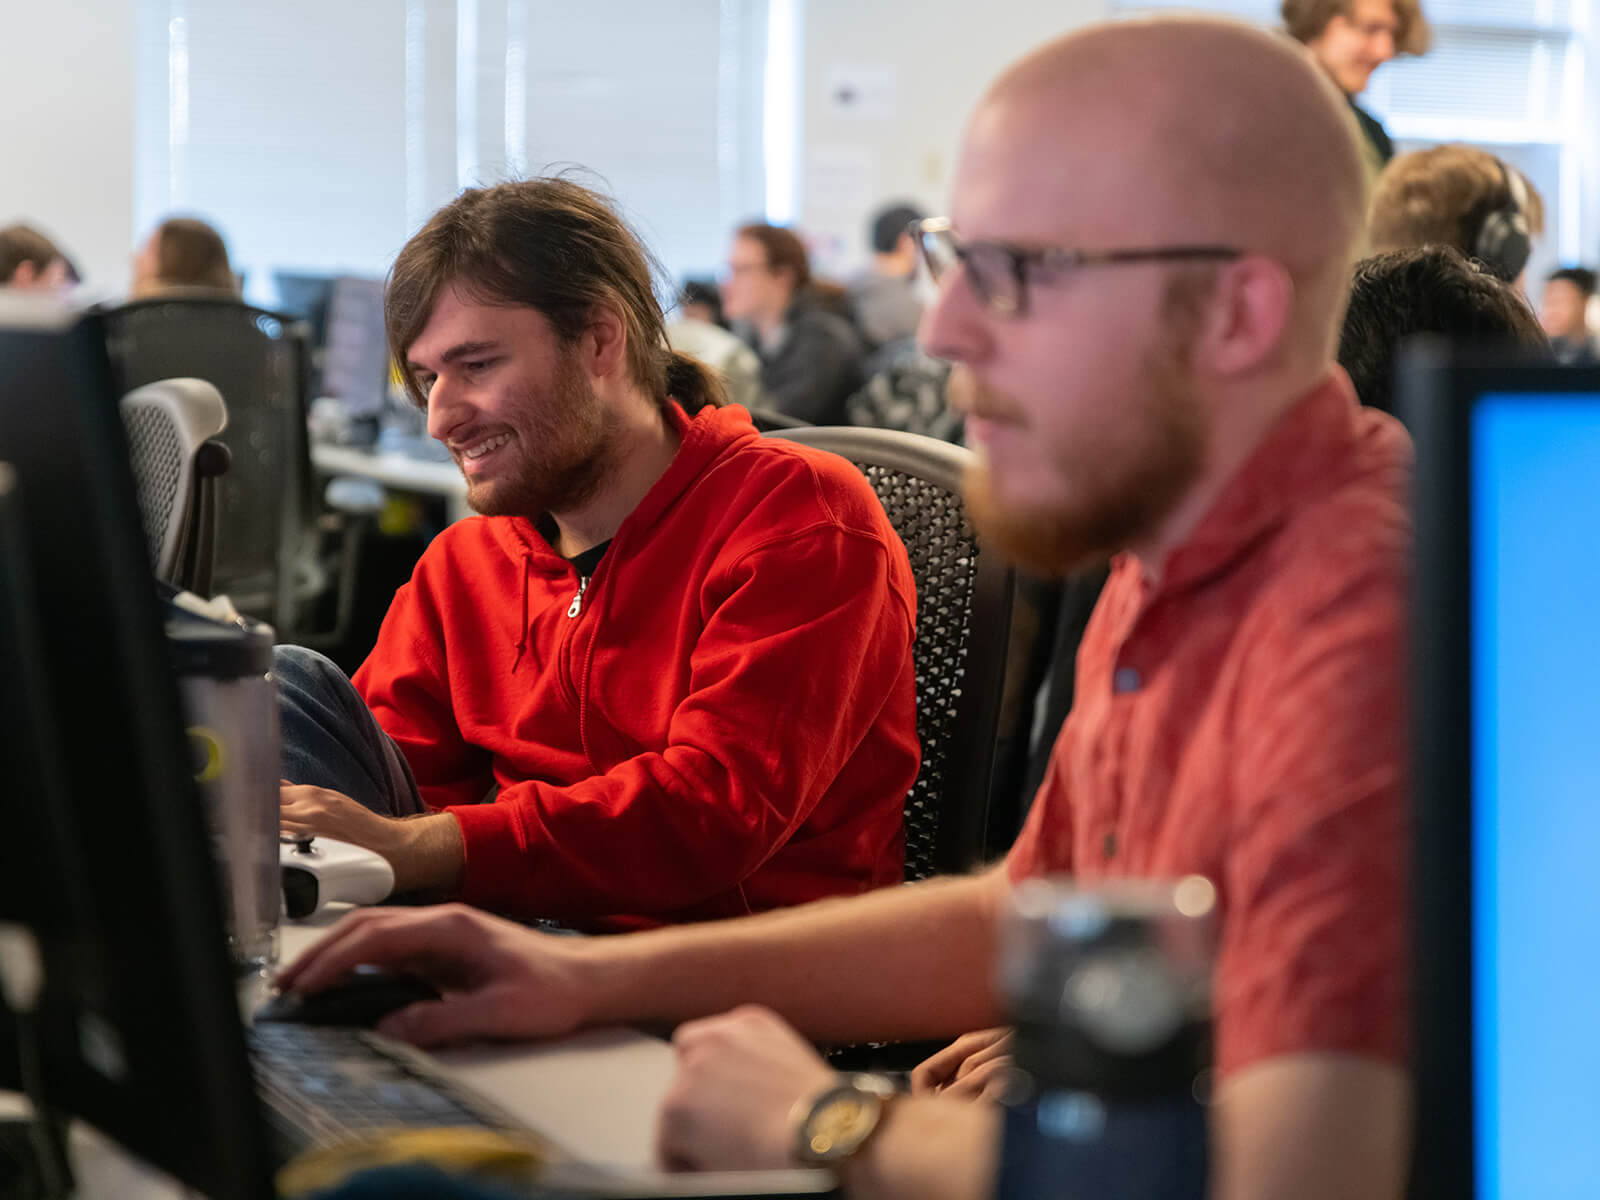 A DigiPen student in a red hoodie smiles as he works on his game project in the Tesla production lab.